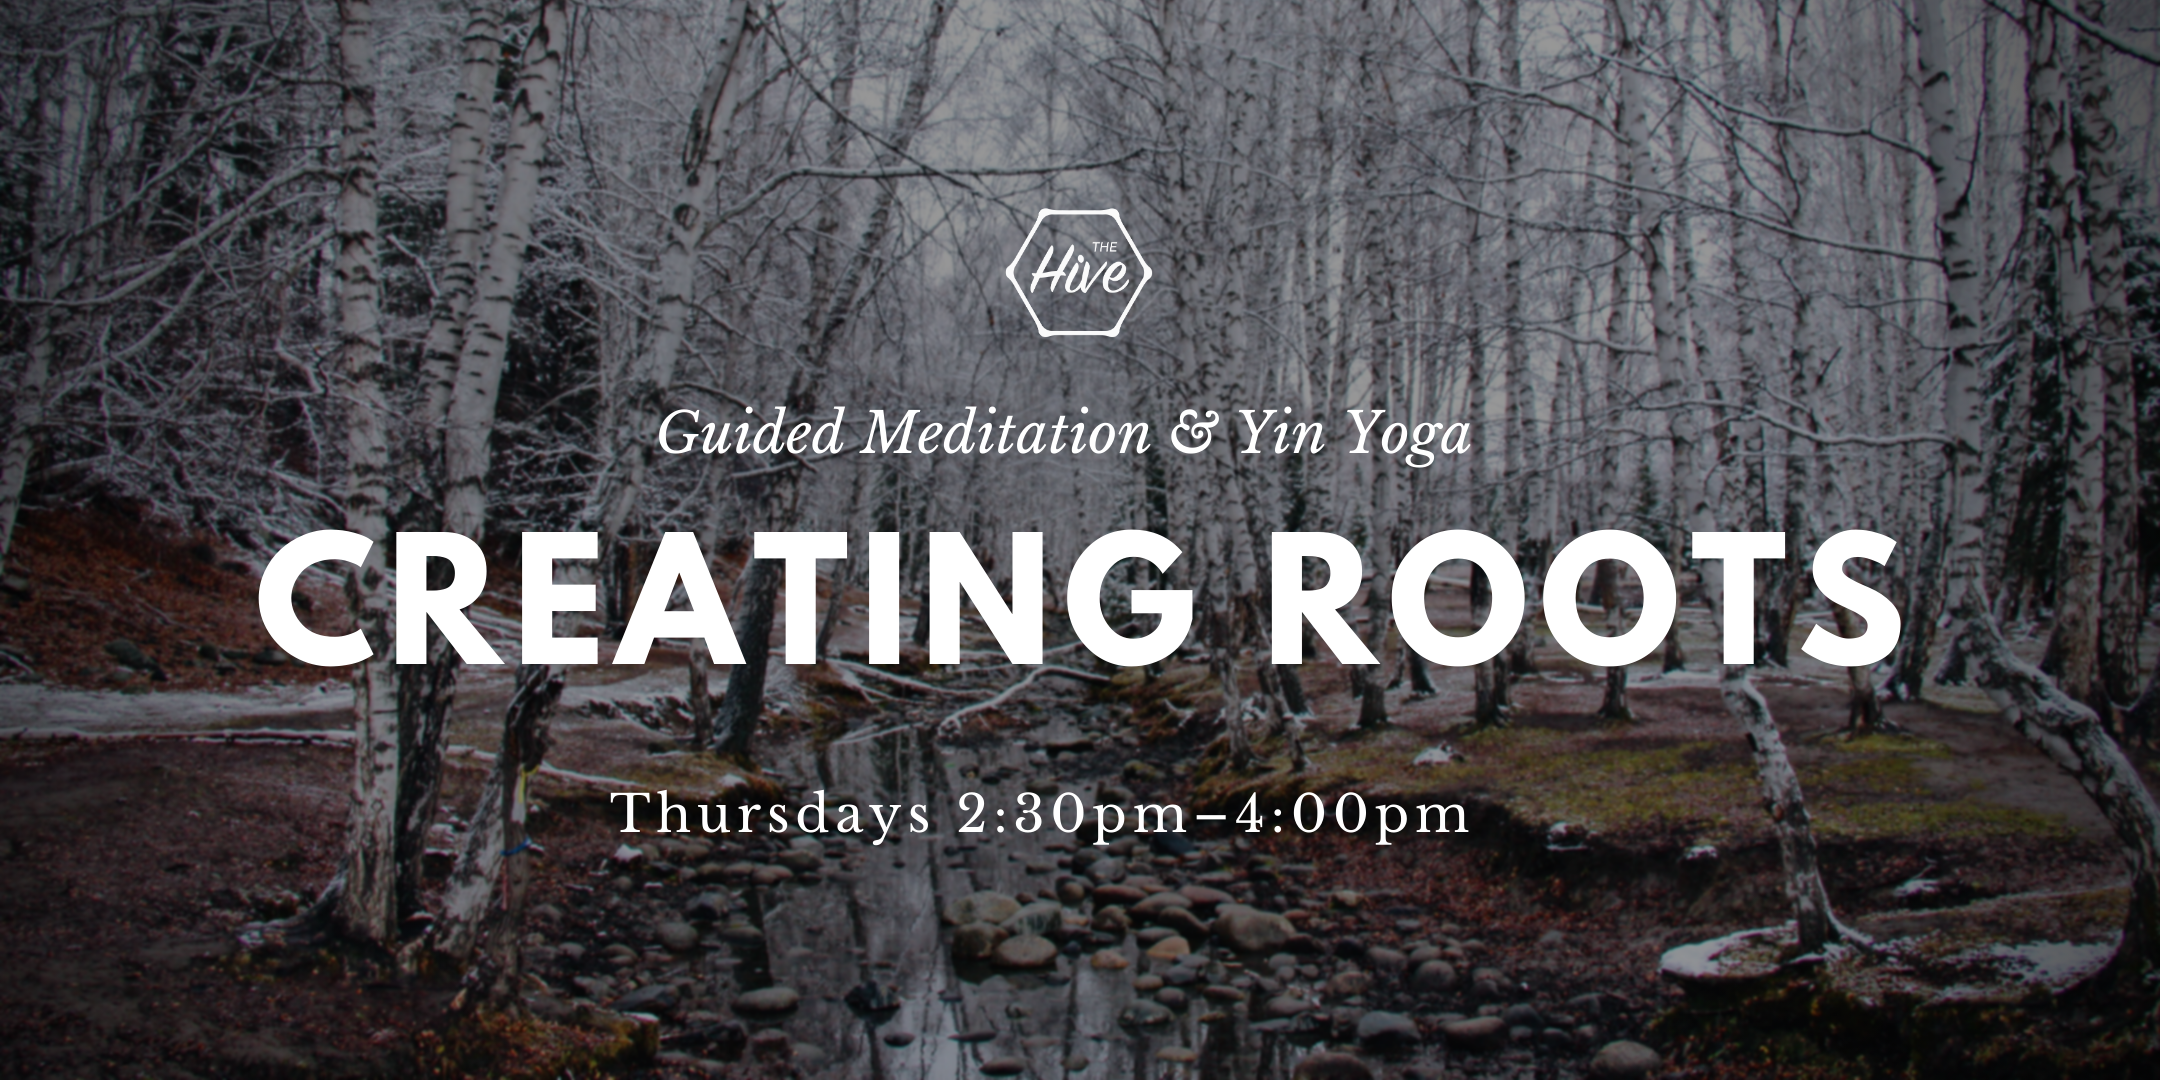 Creating Roots: Guided Meditation and Yin Yoga